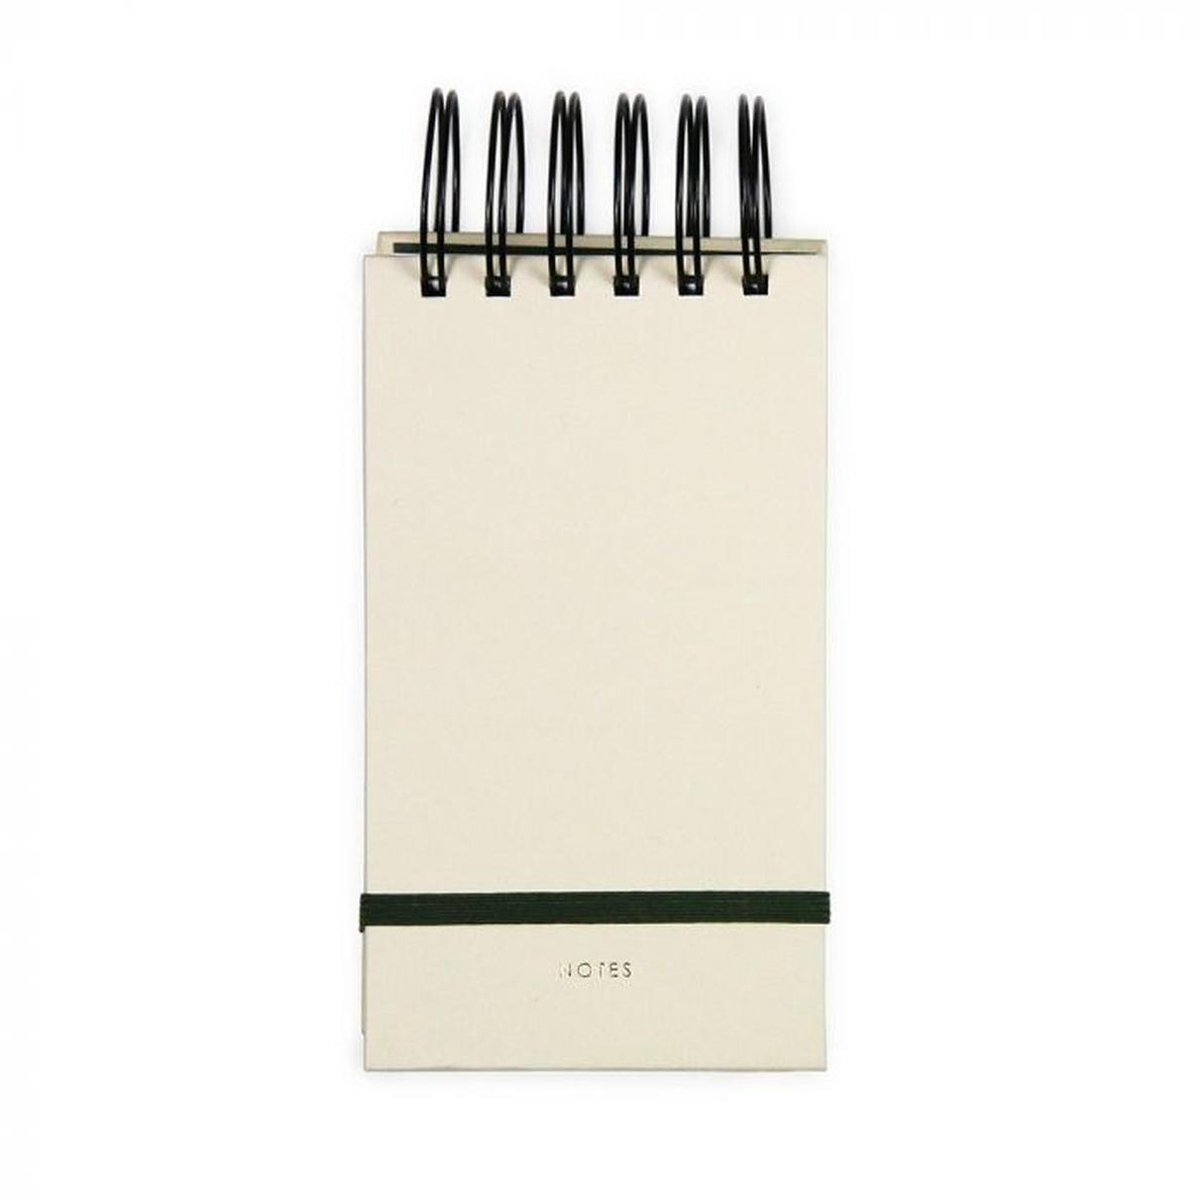 Notepad Small - 16 x 9 cm